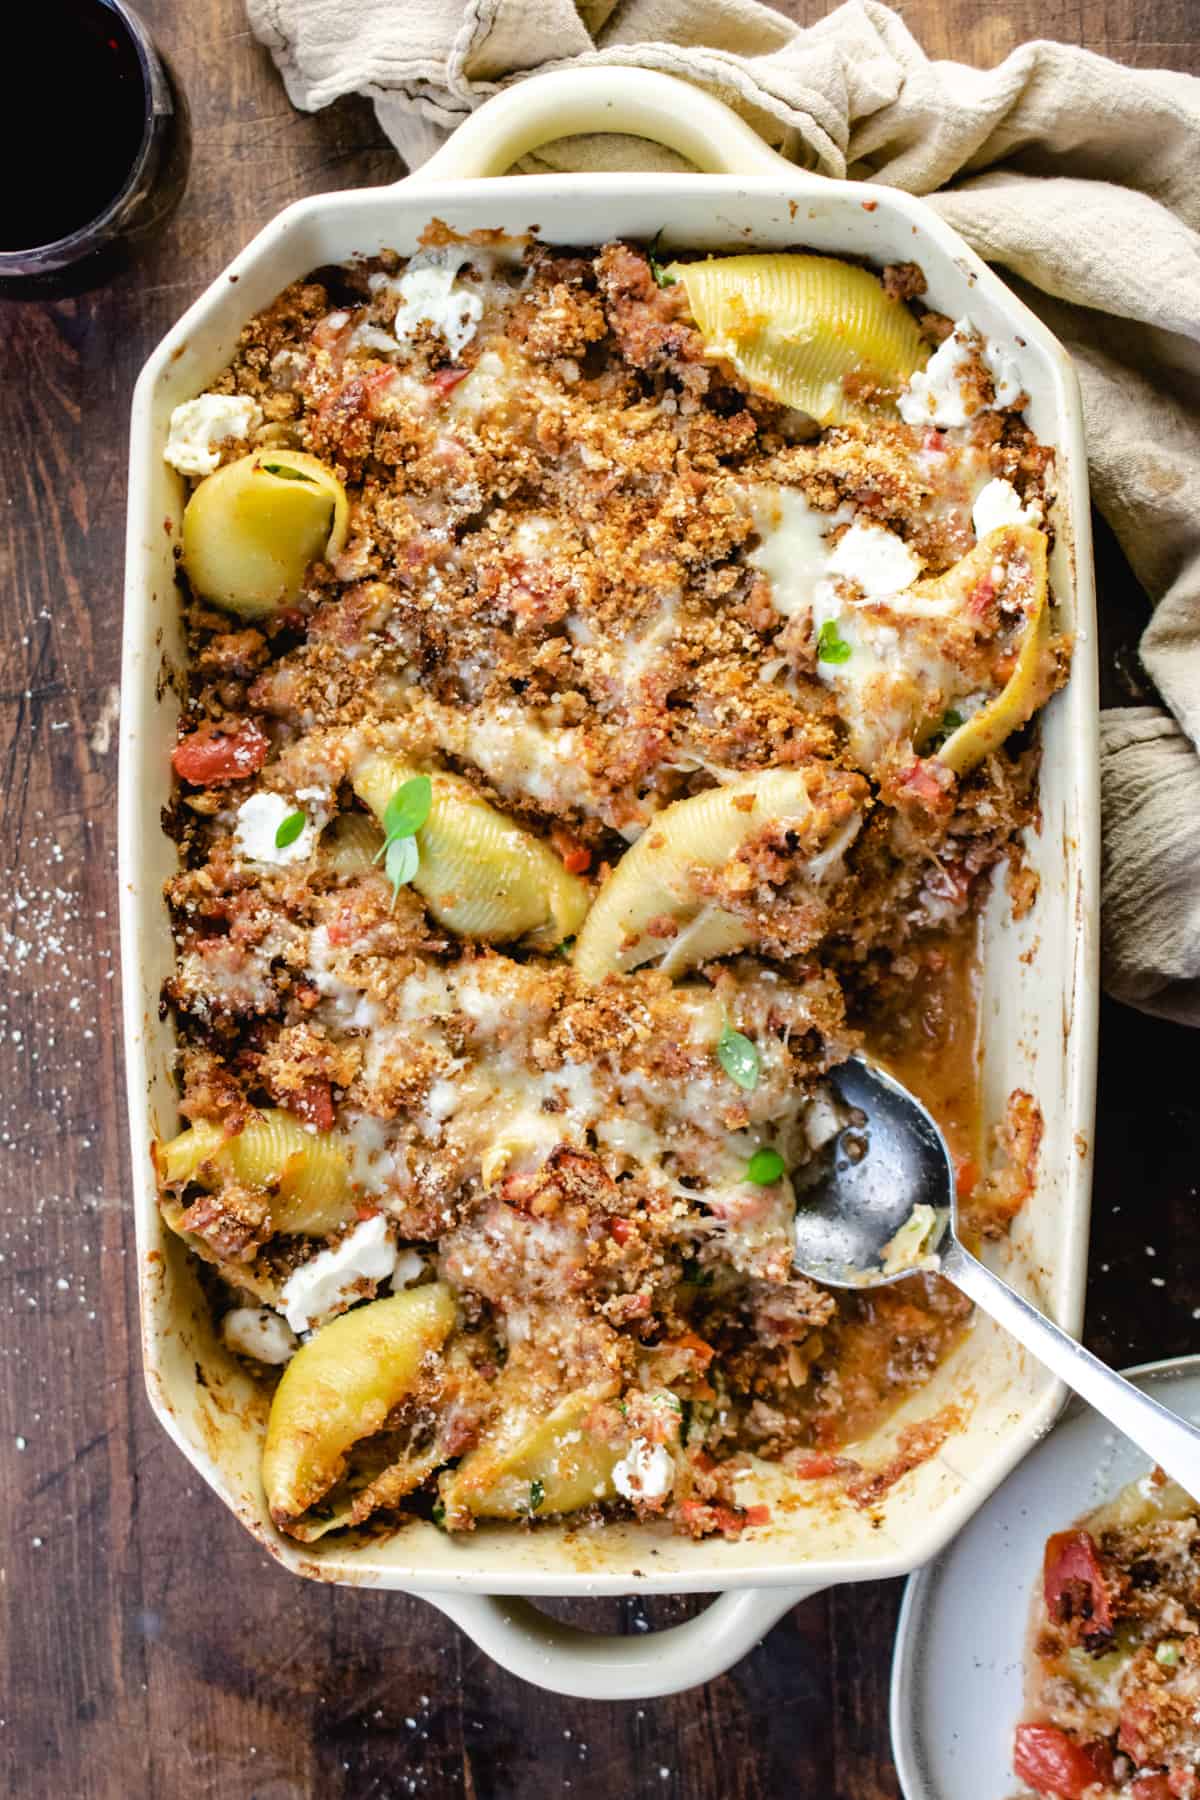 Baked stuffed pasta shells in a casserole dish with a serving spoon.